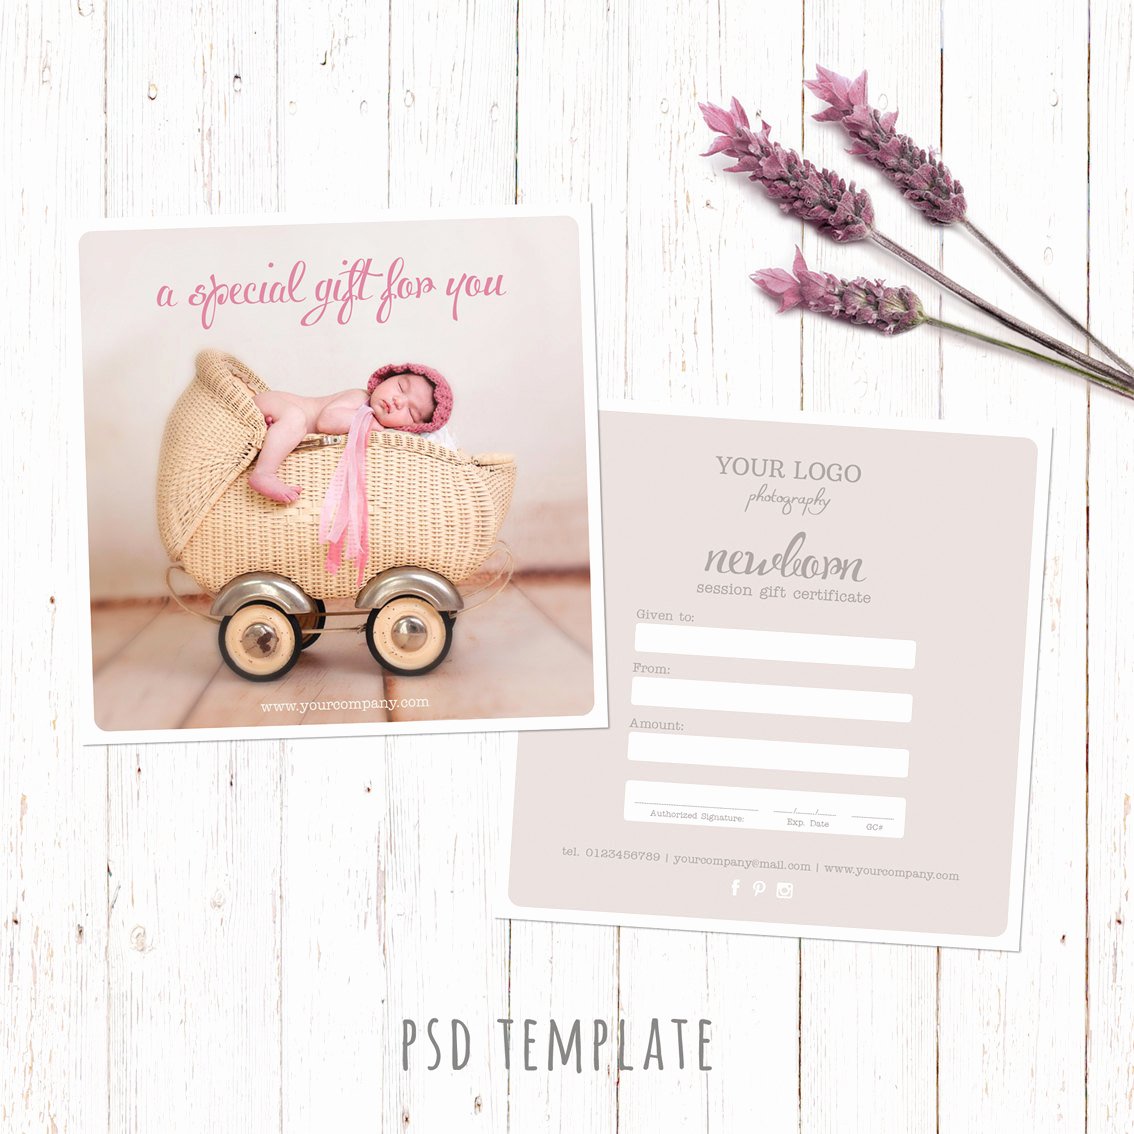 Photo Session Gift Certificate Awesome Gift Certificate Template Newborn Session Photography T